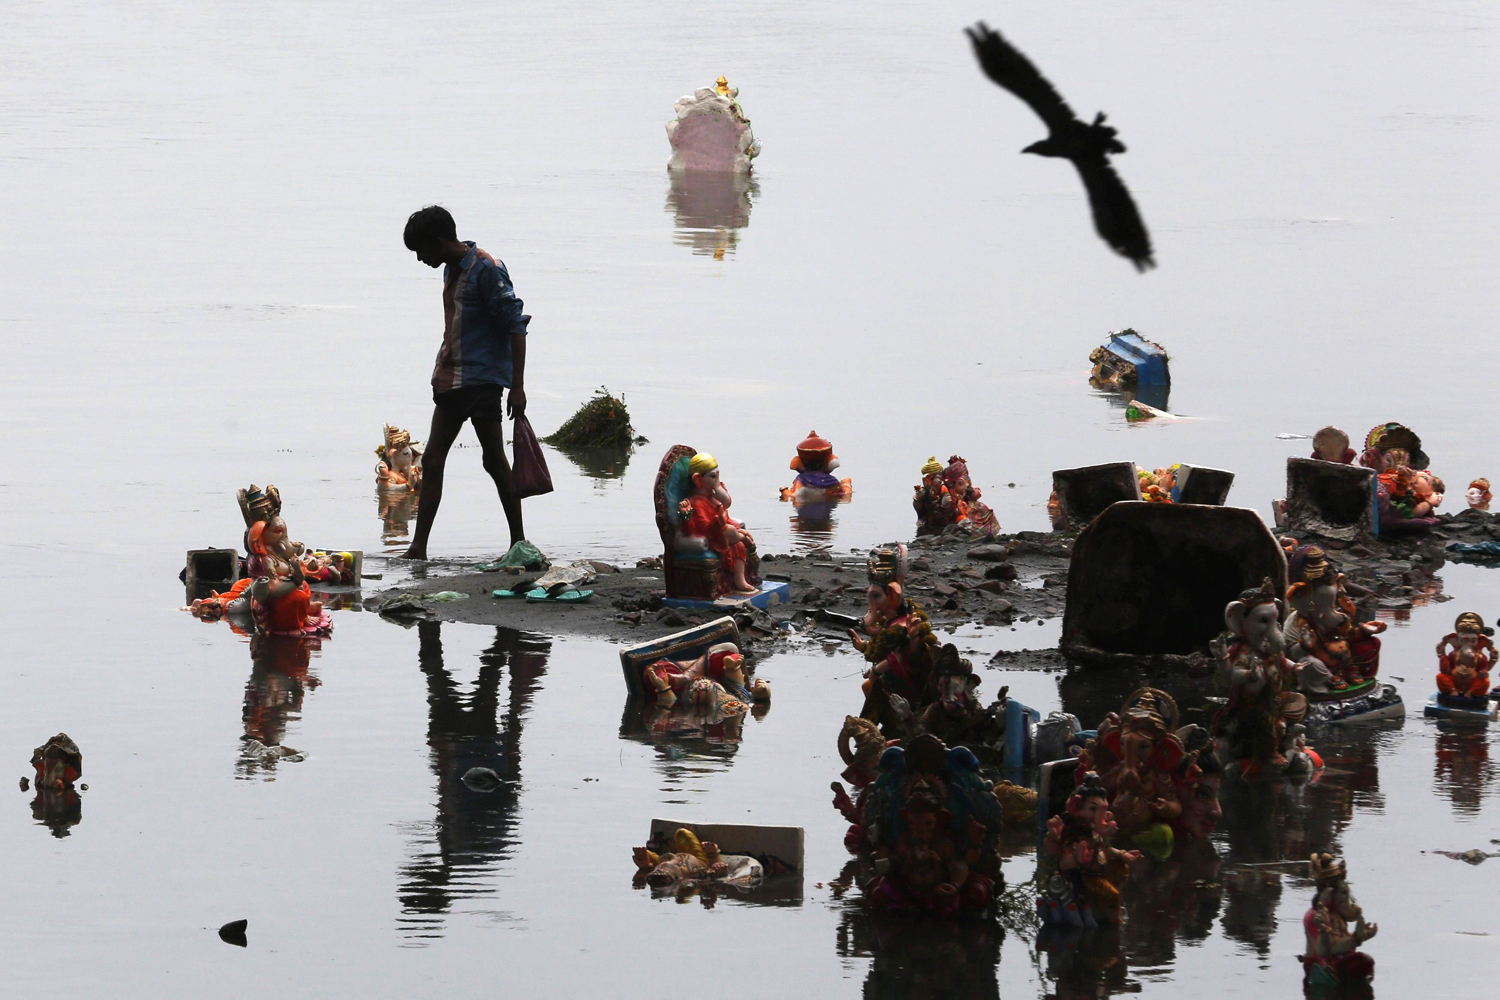 Sept. 9, 2014. A boy collects items thrown by devotees as religious offerings next to idols of the Hindu elephant god Ganesh, the deity of prosperity, a day after they were immersed in the waters of the Sabarmati river in the western Indian city of Ahmedabad.